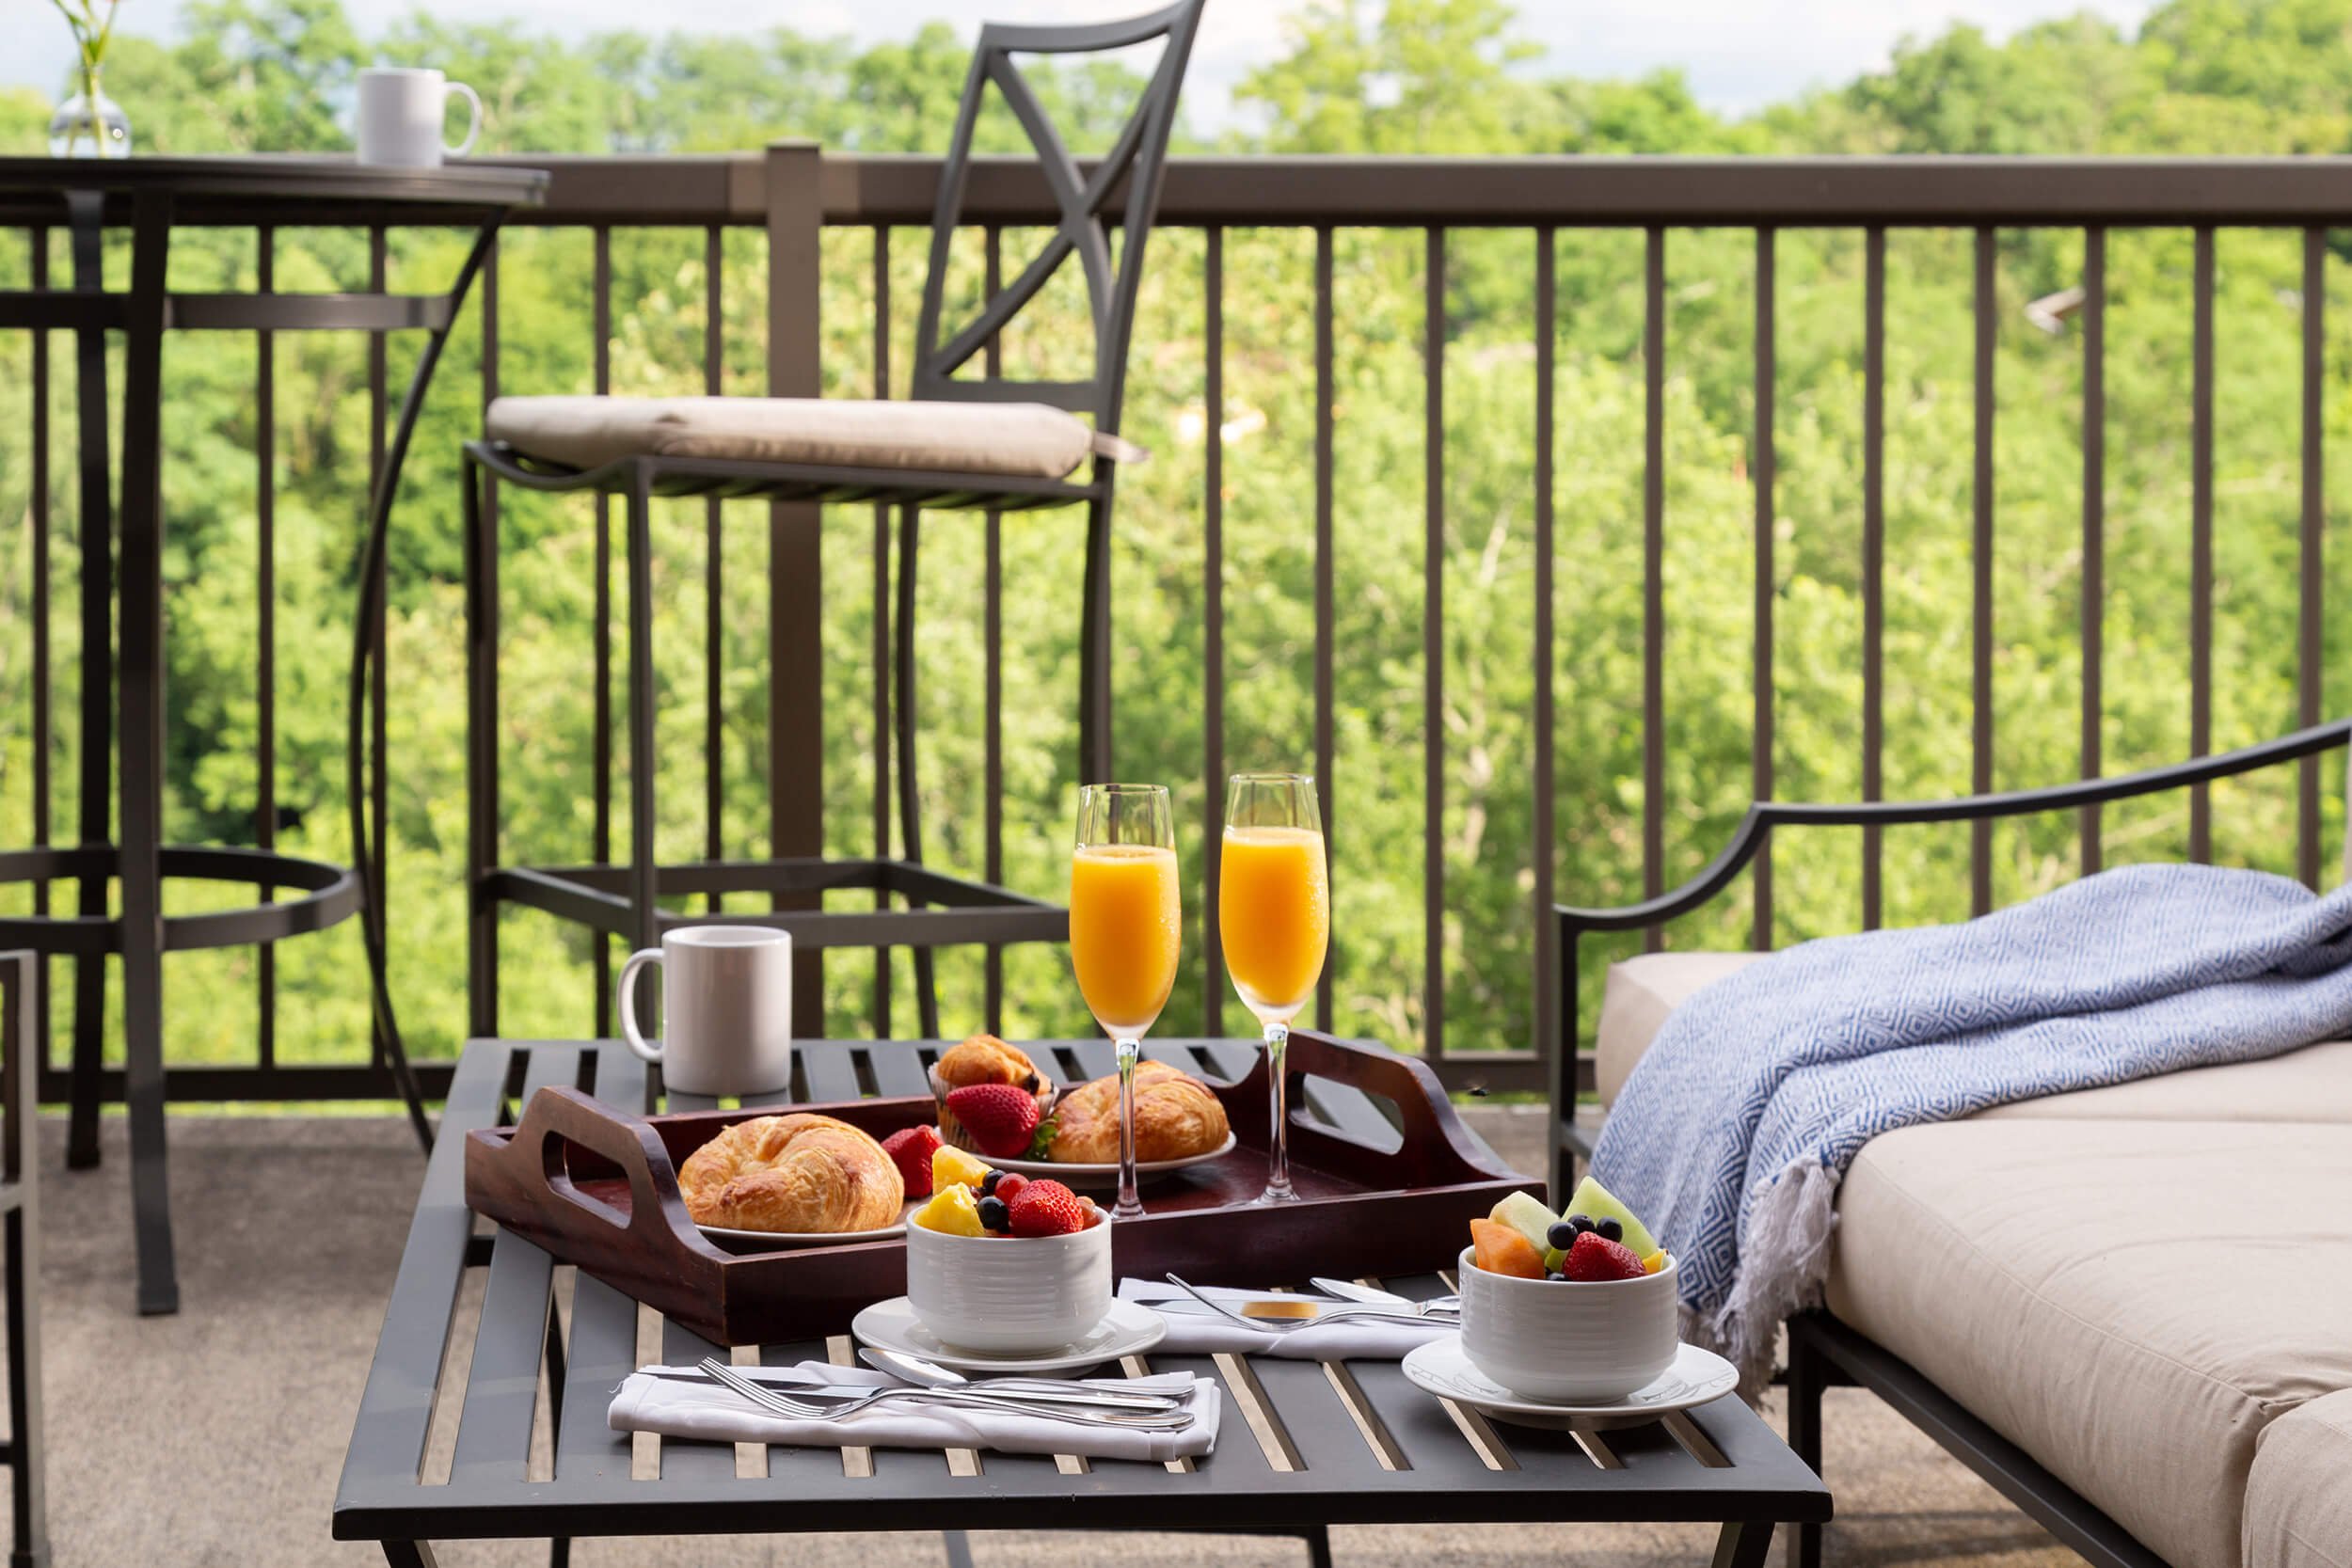 Breakfast on the balcony of a Queen Supreme room at Diamond Mills hotel in Saugerties, NY